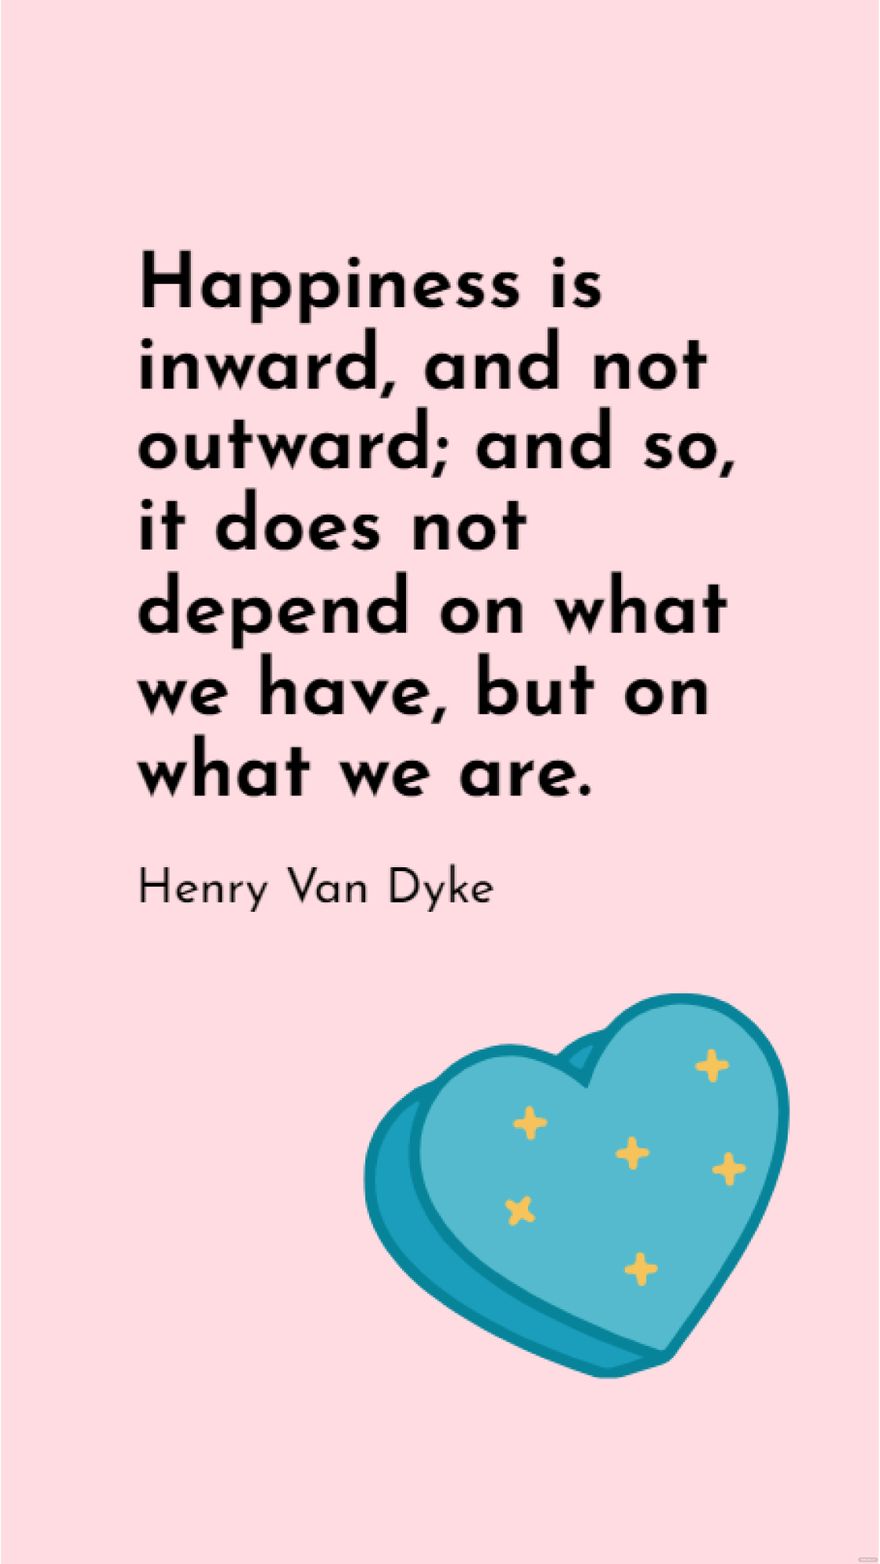 Henry Van Dyke - Happiness is inward, and not outward; and so, it does not depend on what we have, but on what we are.